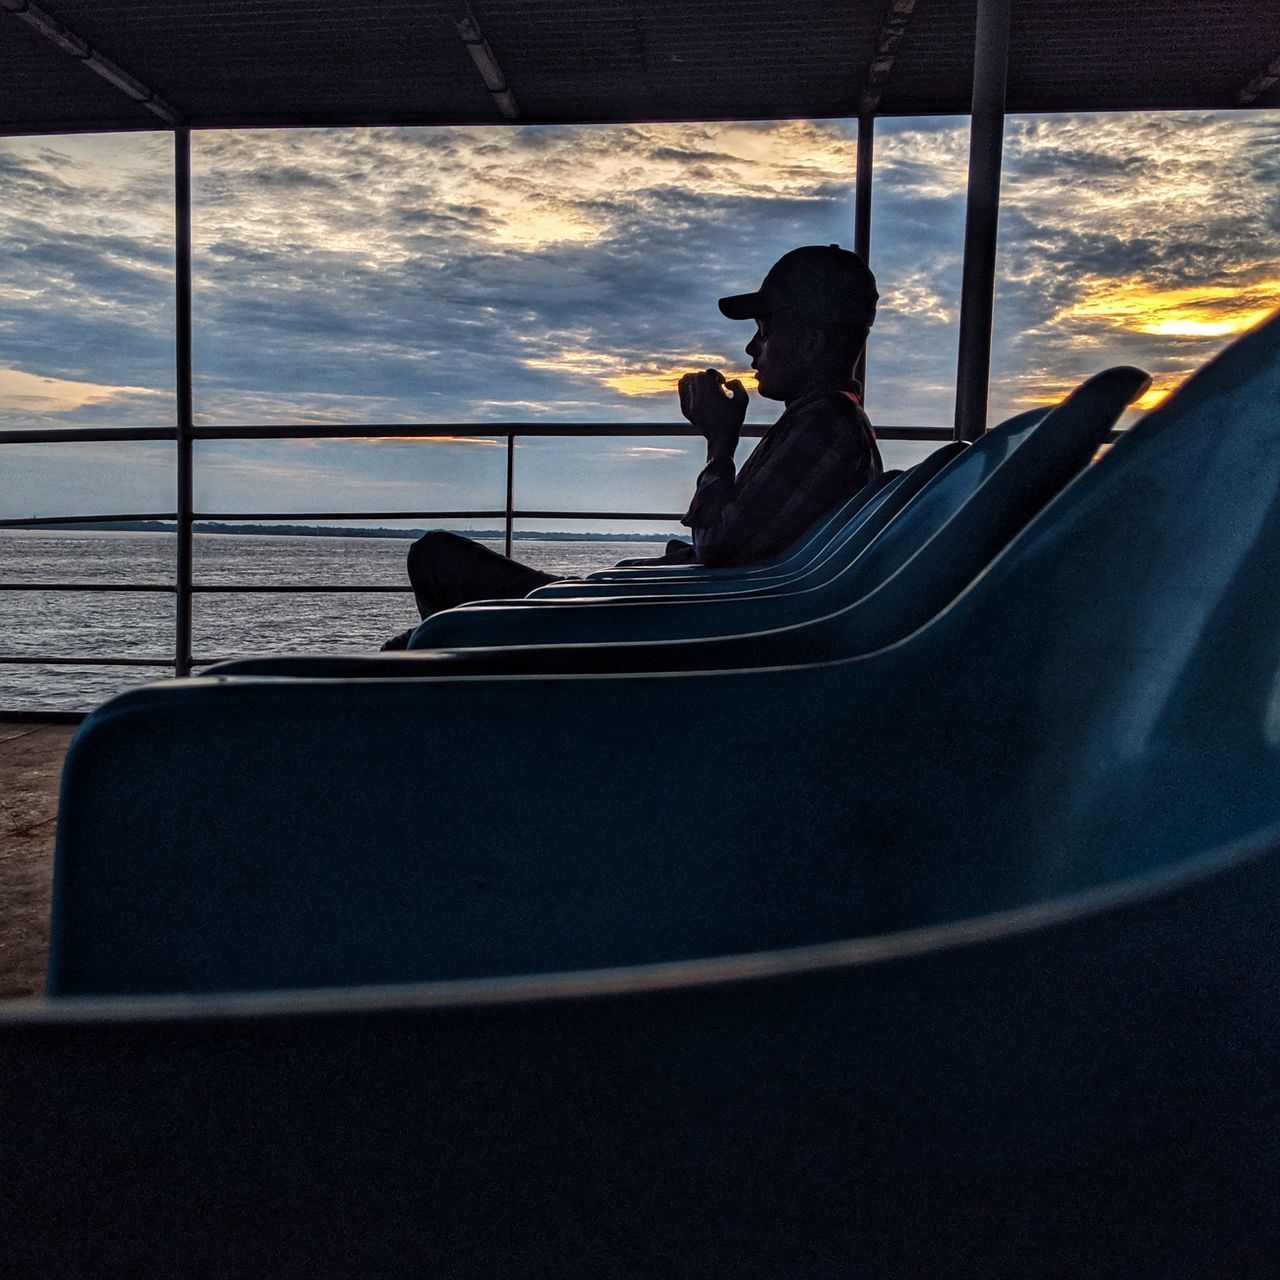 transportation, mode of transportation, real people, window, sitting, cloud - sky, sky, leisure activity, glass - material, lifestyles, nautical vessel, one person, nature, vehicle interior, men, transparent, travel, outdoors, sunset